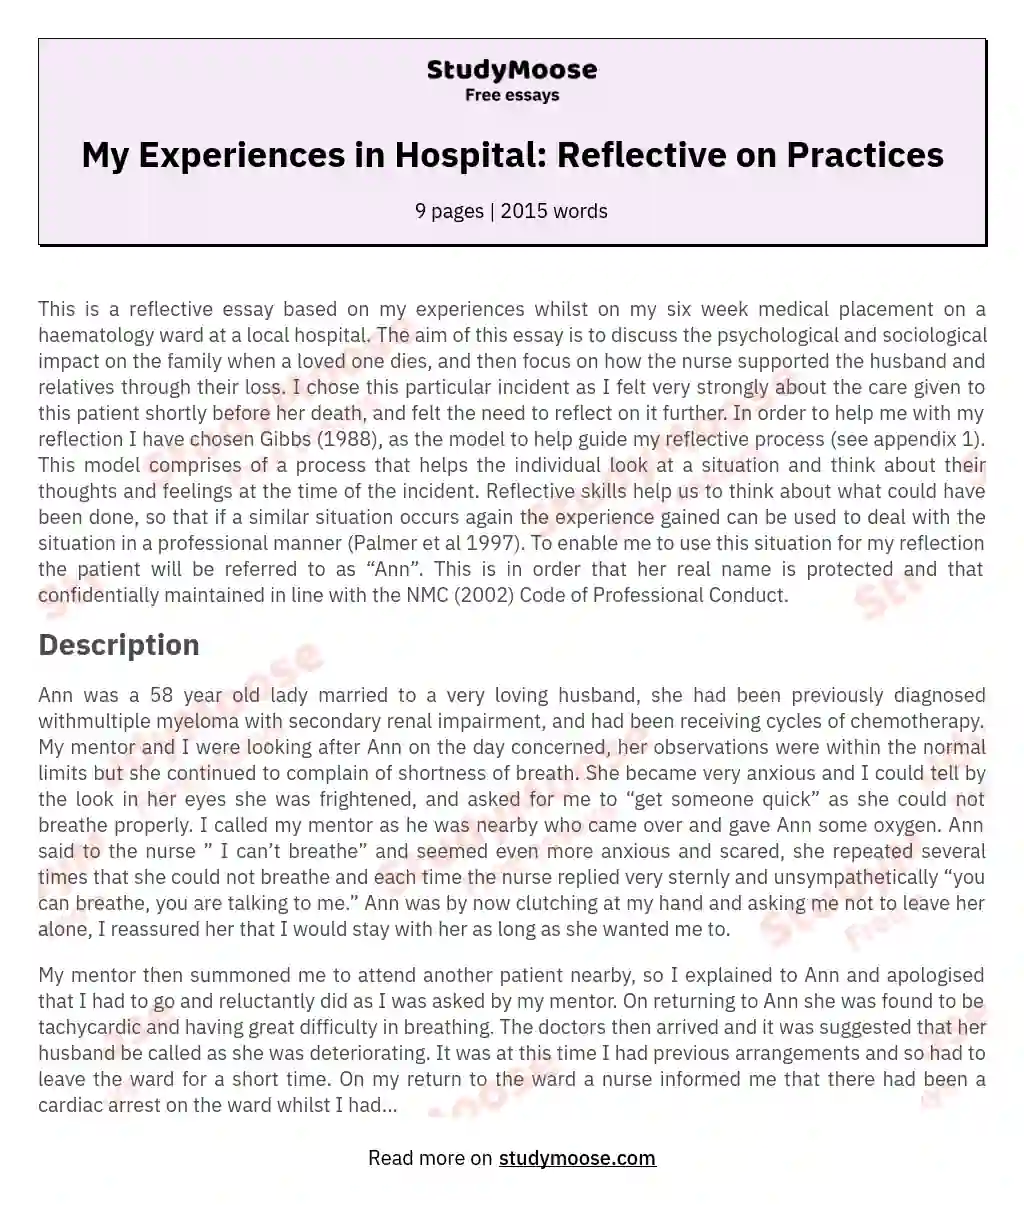 My Experiences in Hospital: Reflective on Practices essay